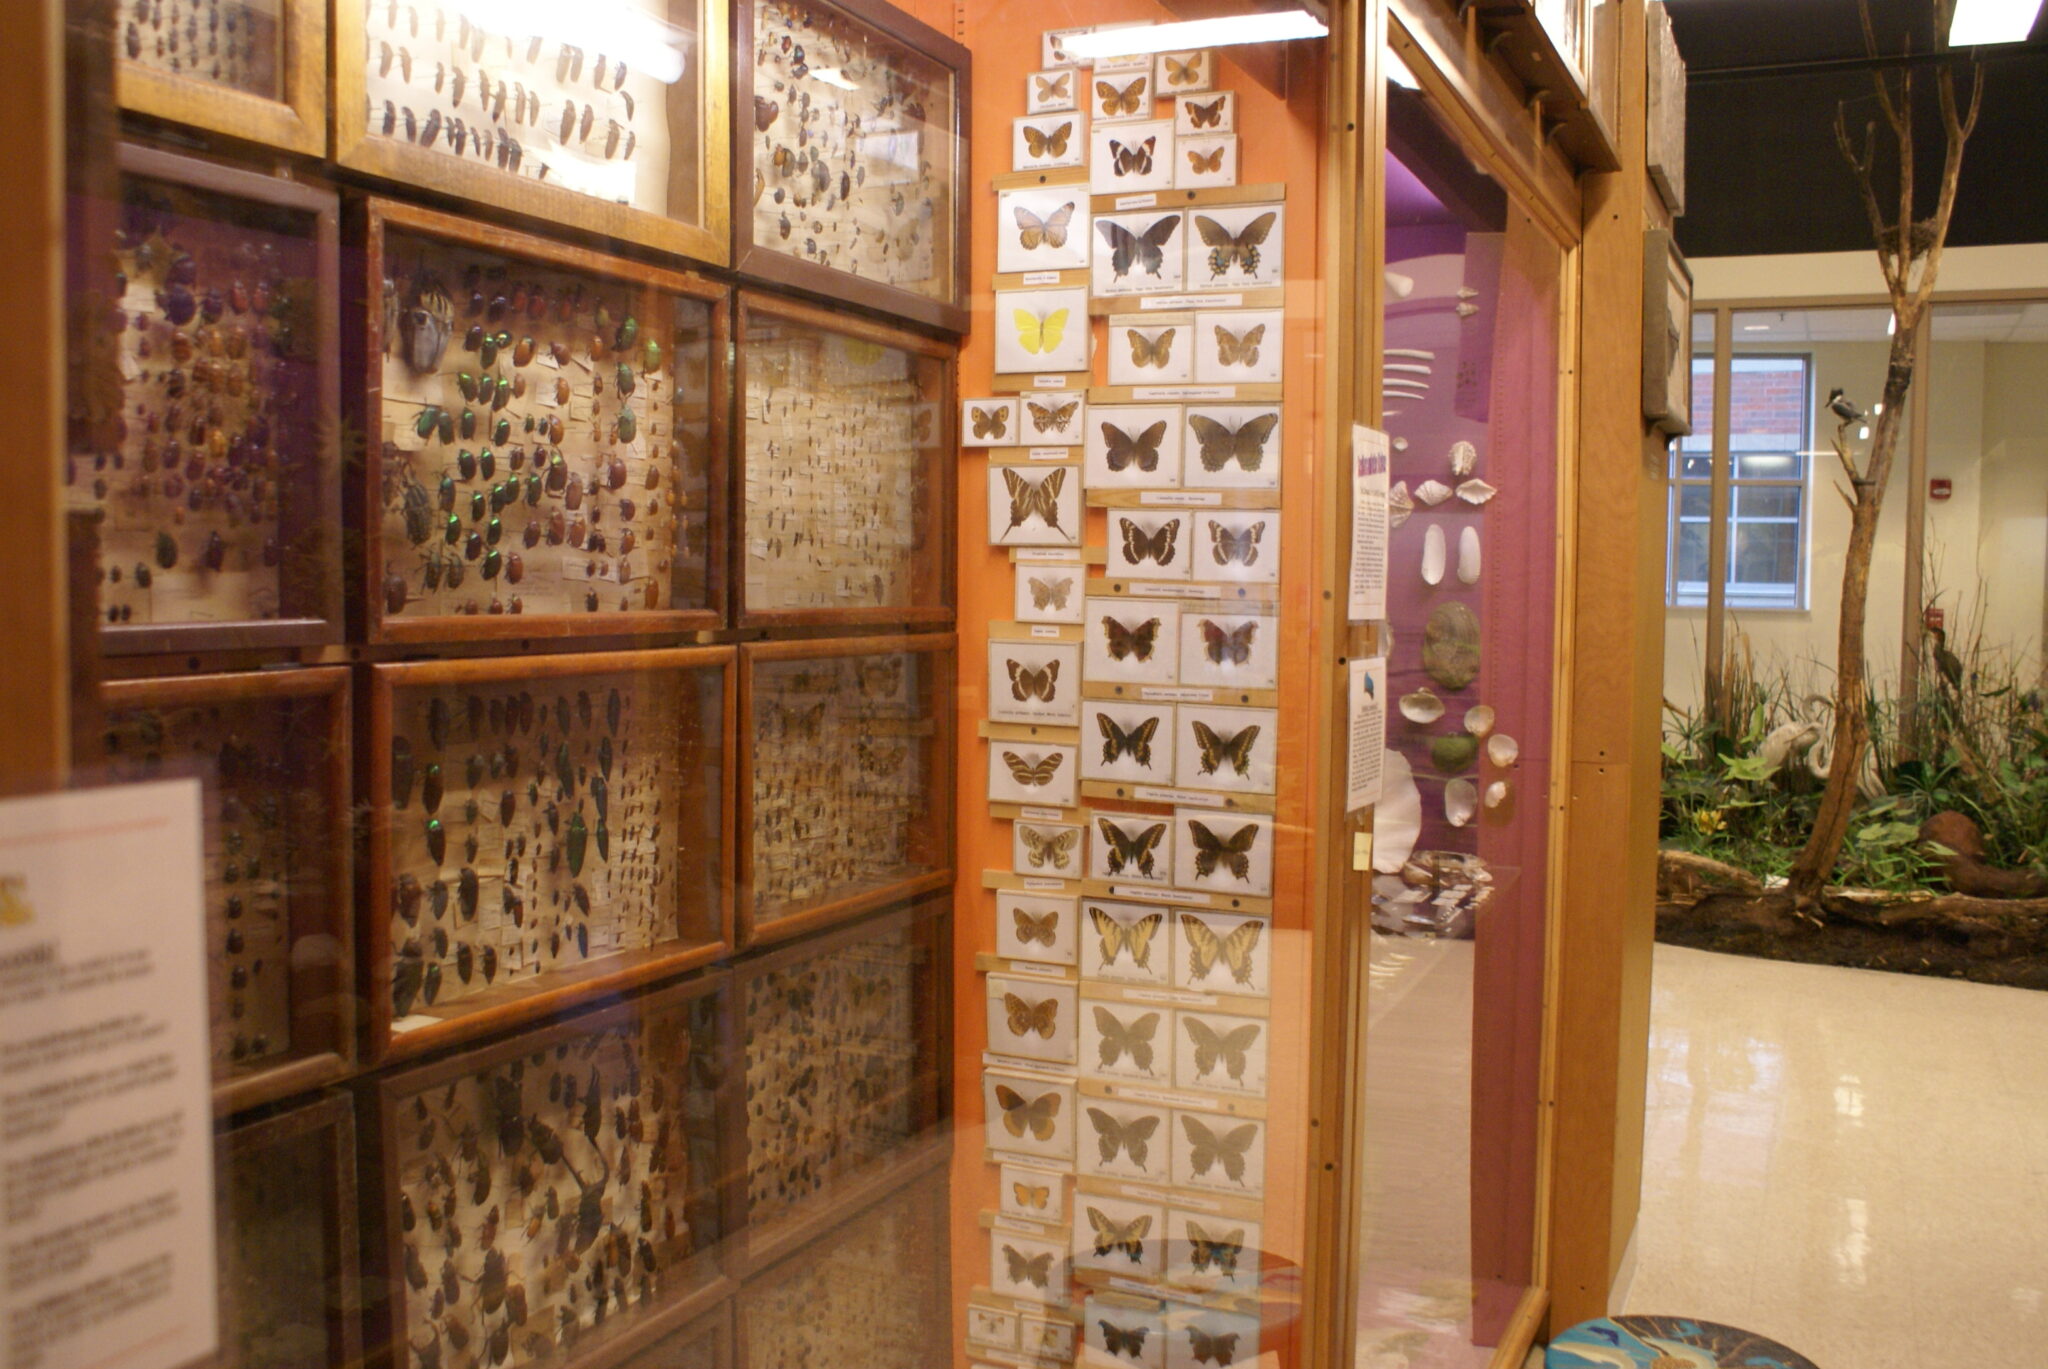 Jurica-Suchy Museum butterfly and insect displays